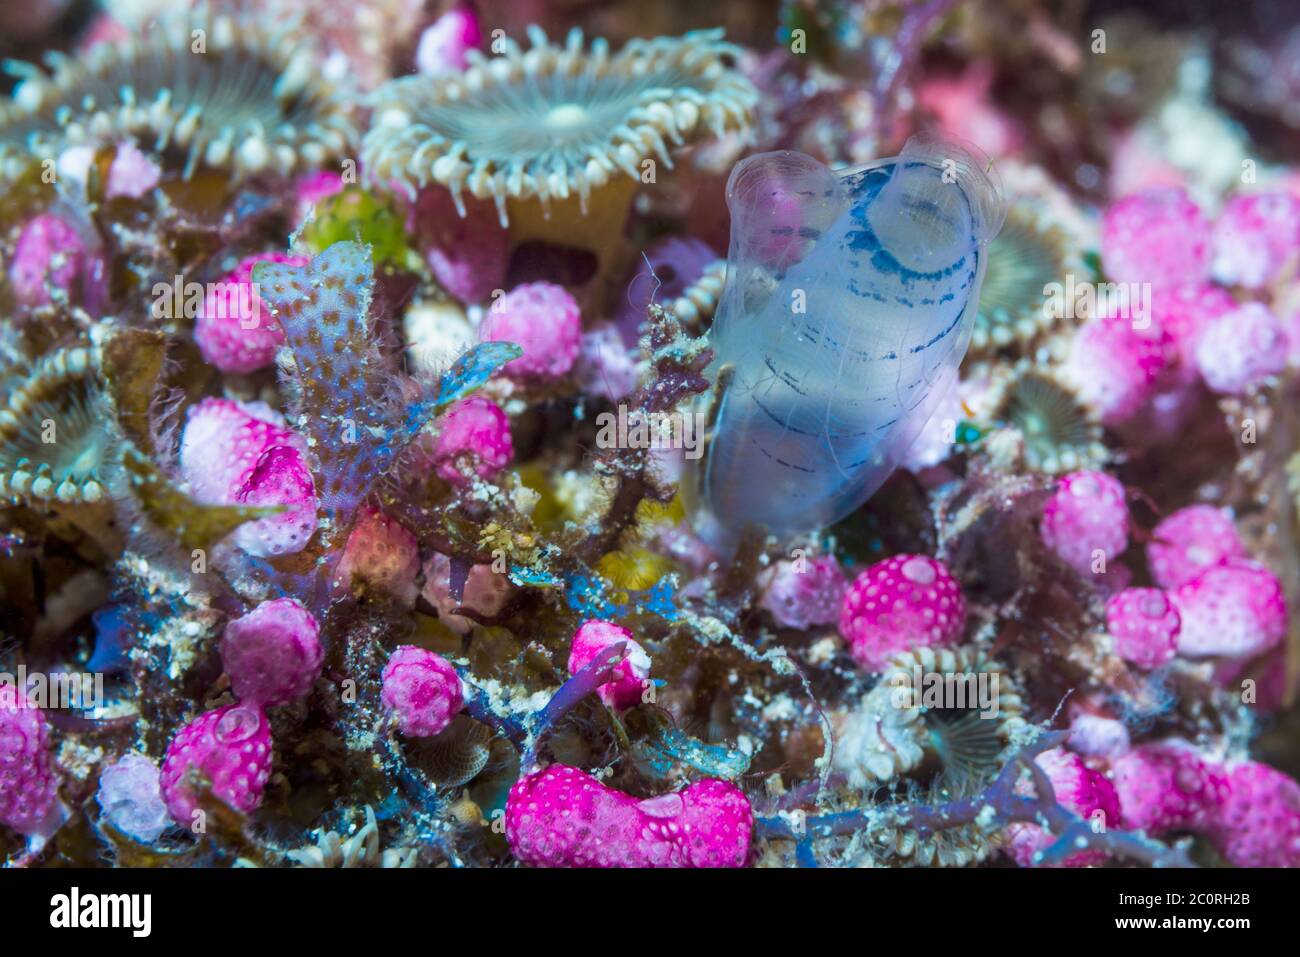 Blue Club Tunicate [Rhopalaea circula], Sea Squirts [Didemnum sp] and Zoanthids, colonial anemones - Protopalythoa species.  West Papua, Indonesia.  I Stock Photo